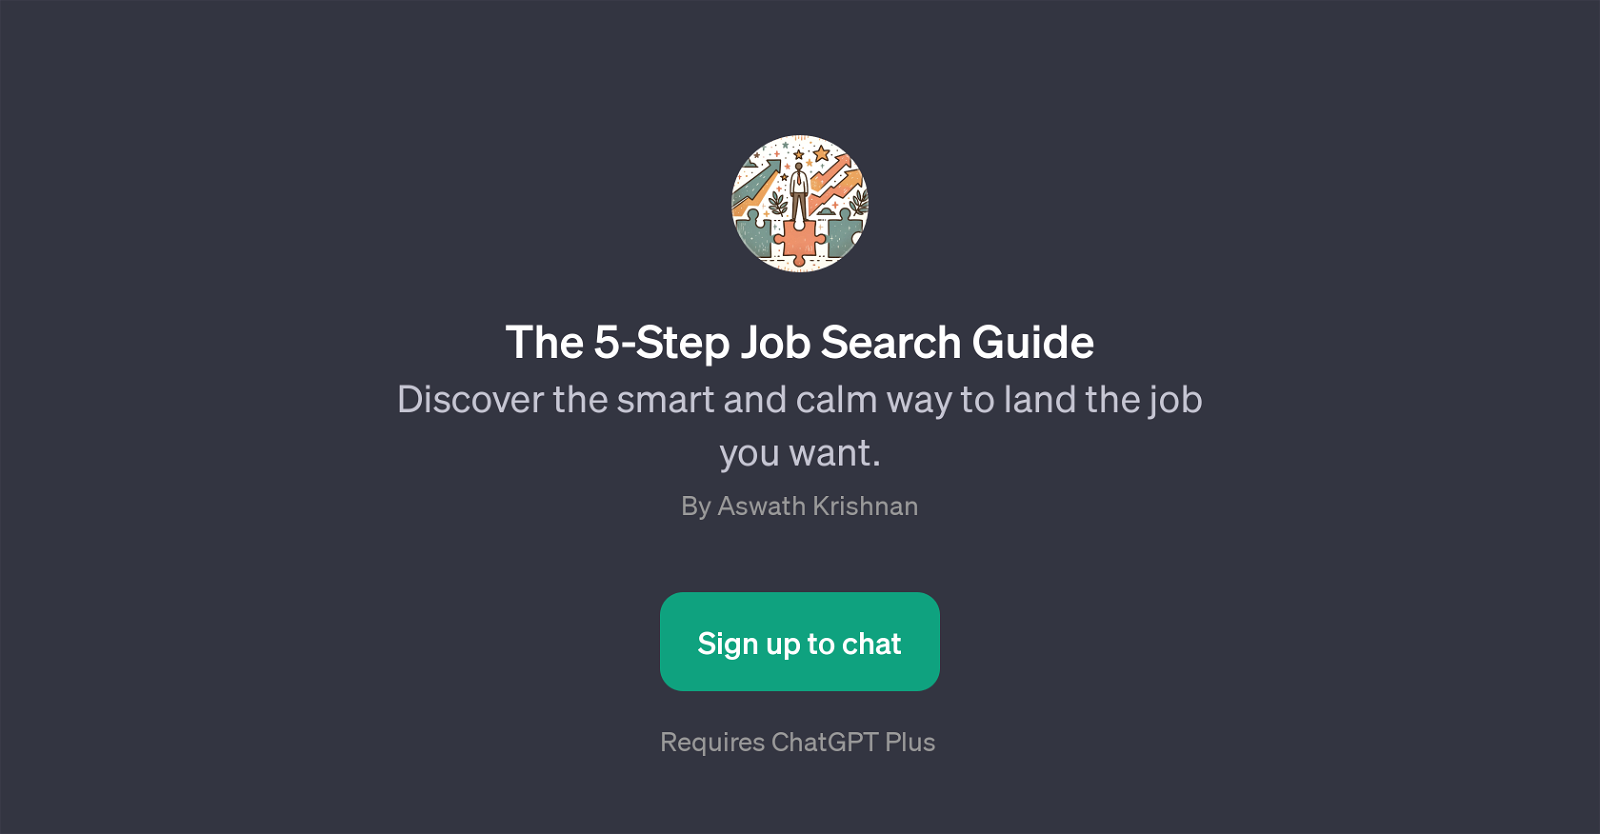 The 5-Step Job Search Guide website